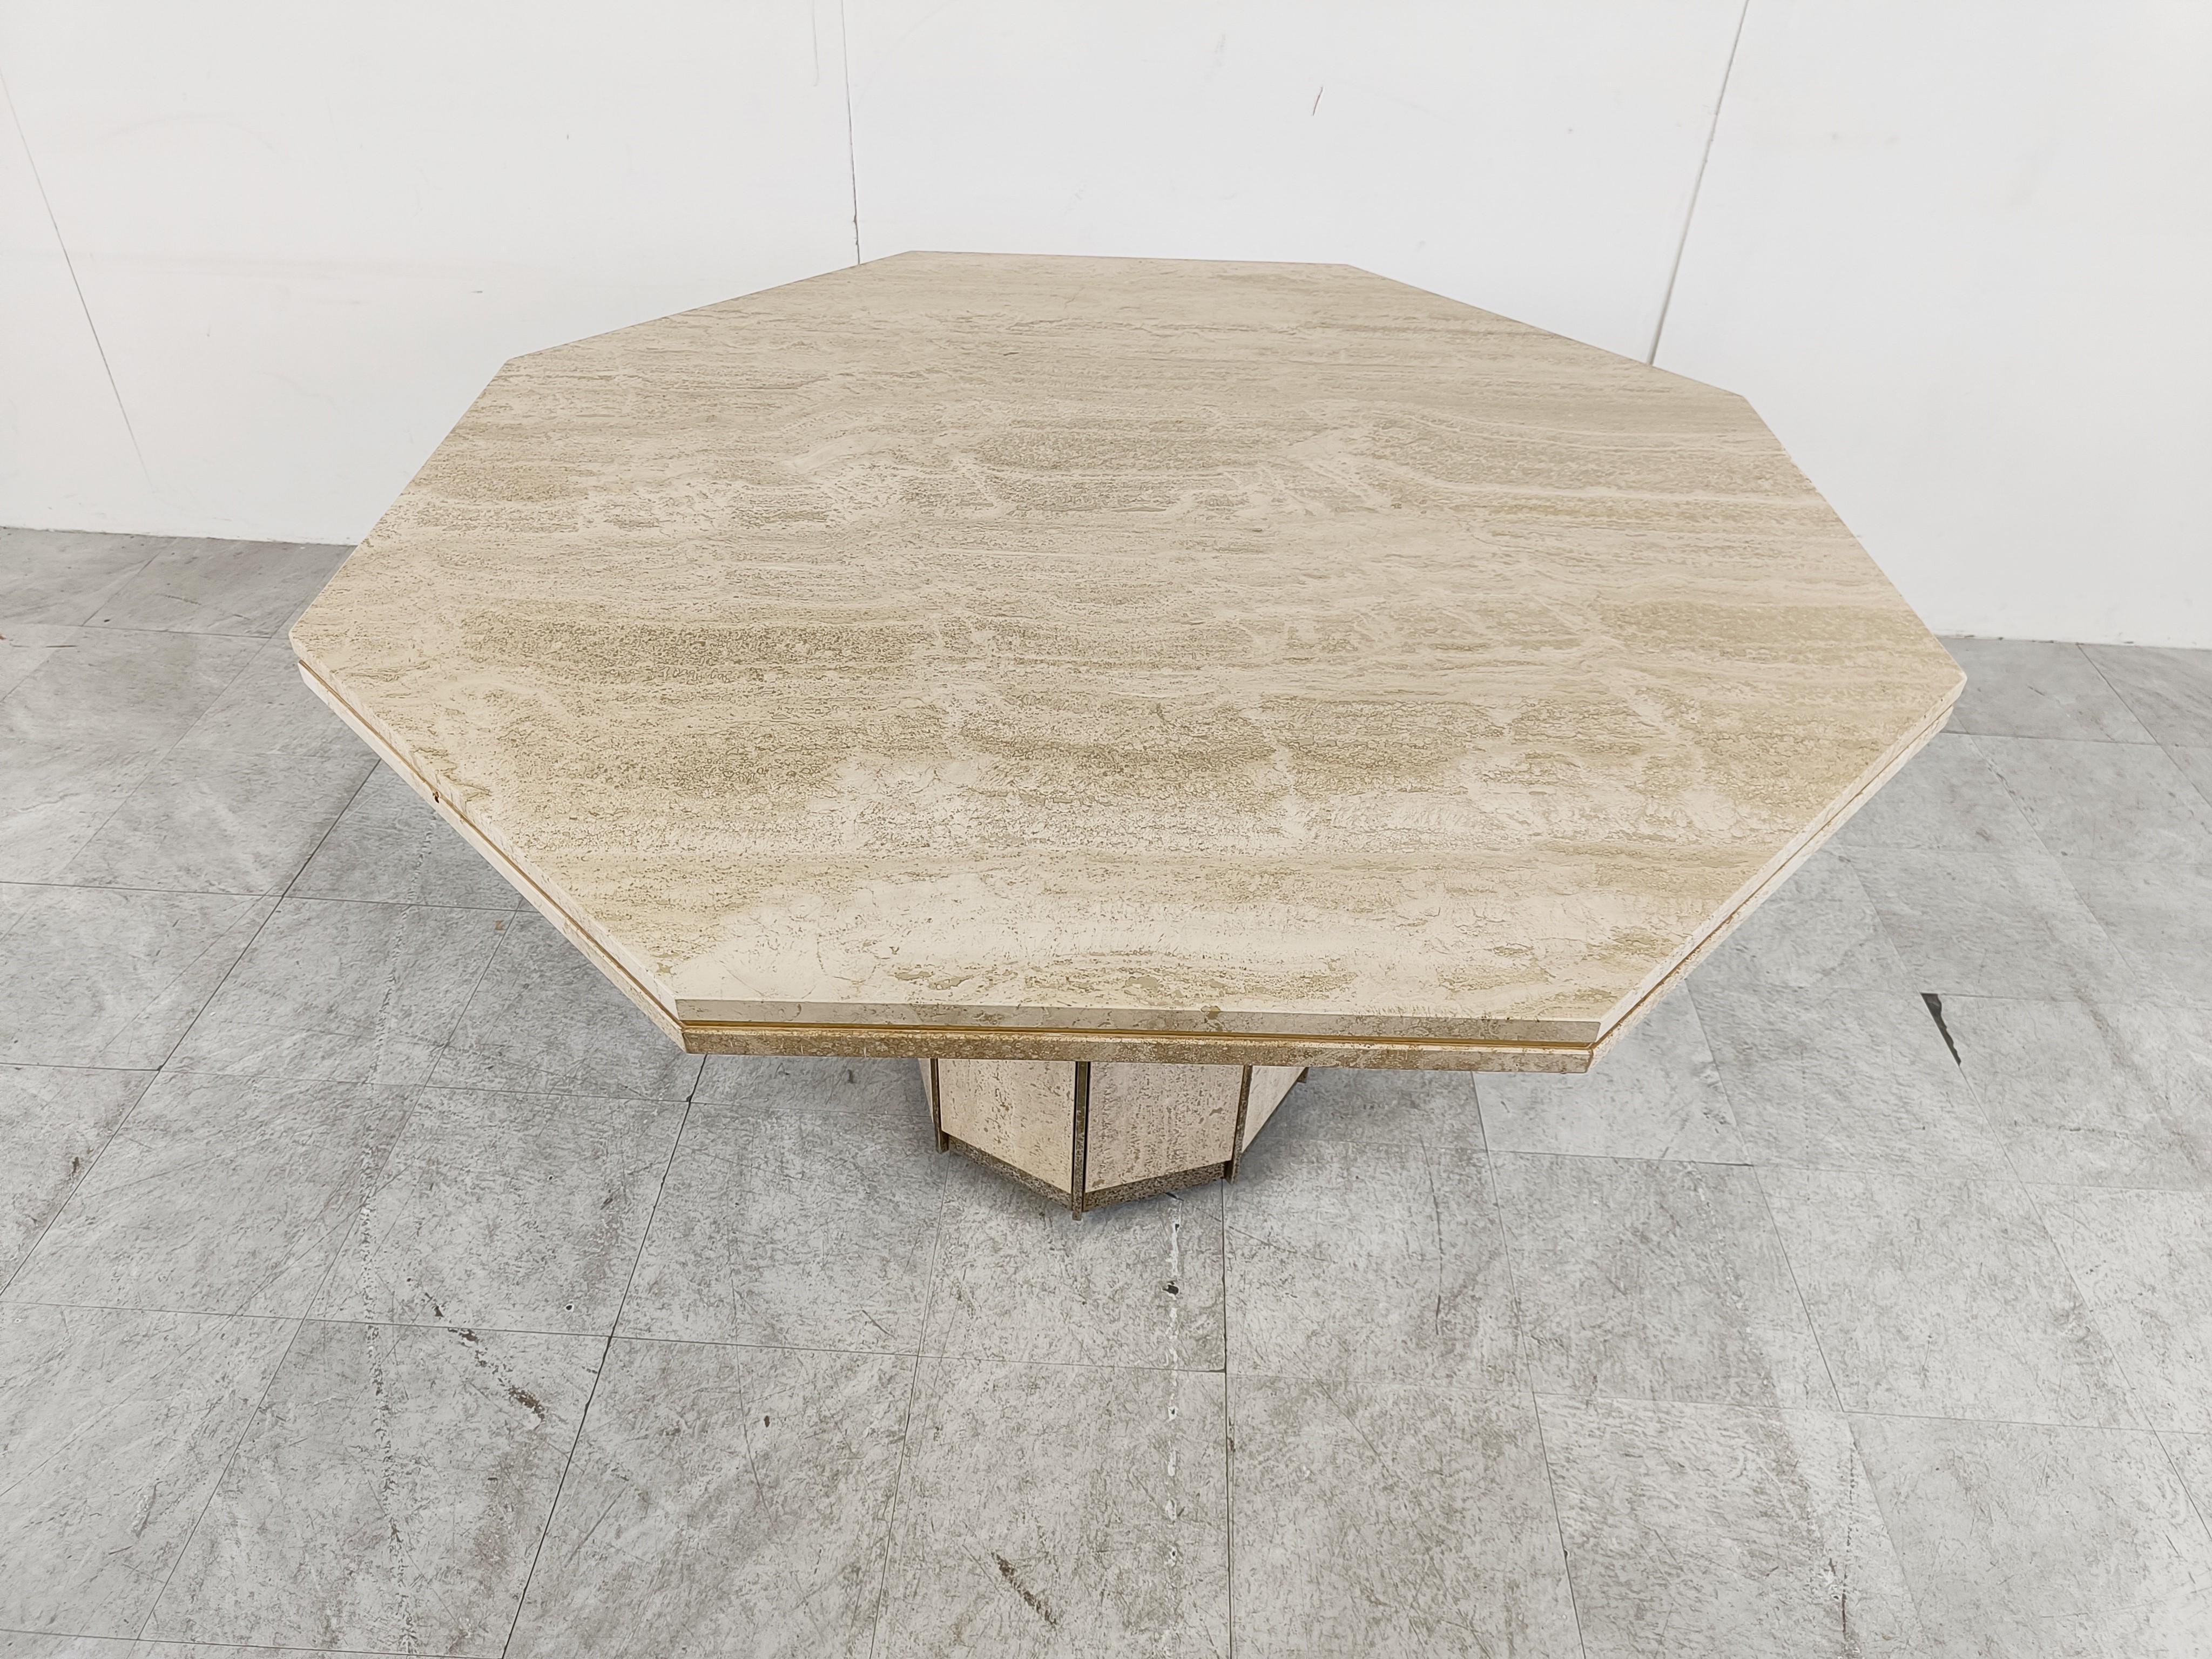 Hollywood Regency Octogonal Italian Travertine and Brass Dining Table, 1970s For Sale